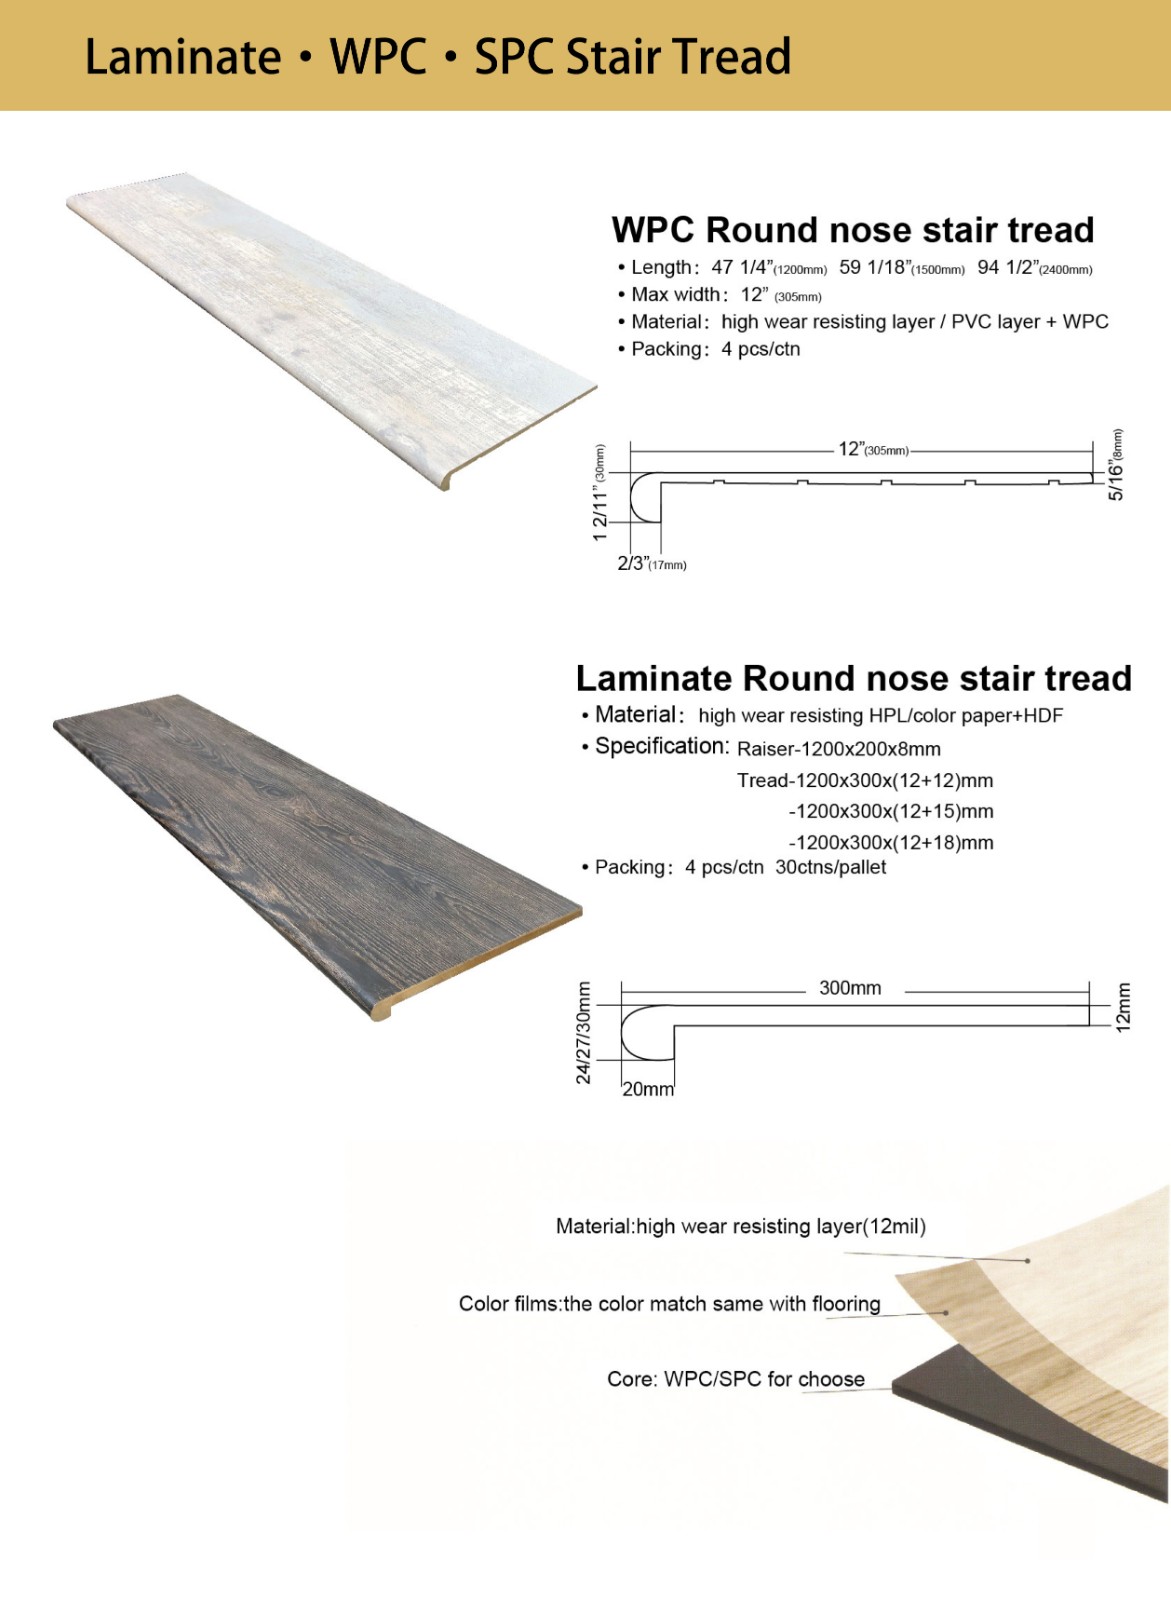 New Collection Laminate WPC SPC Stair Tread